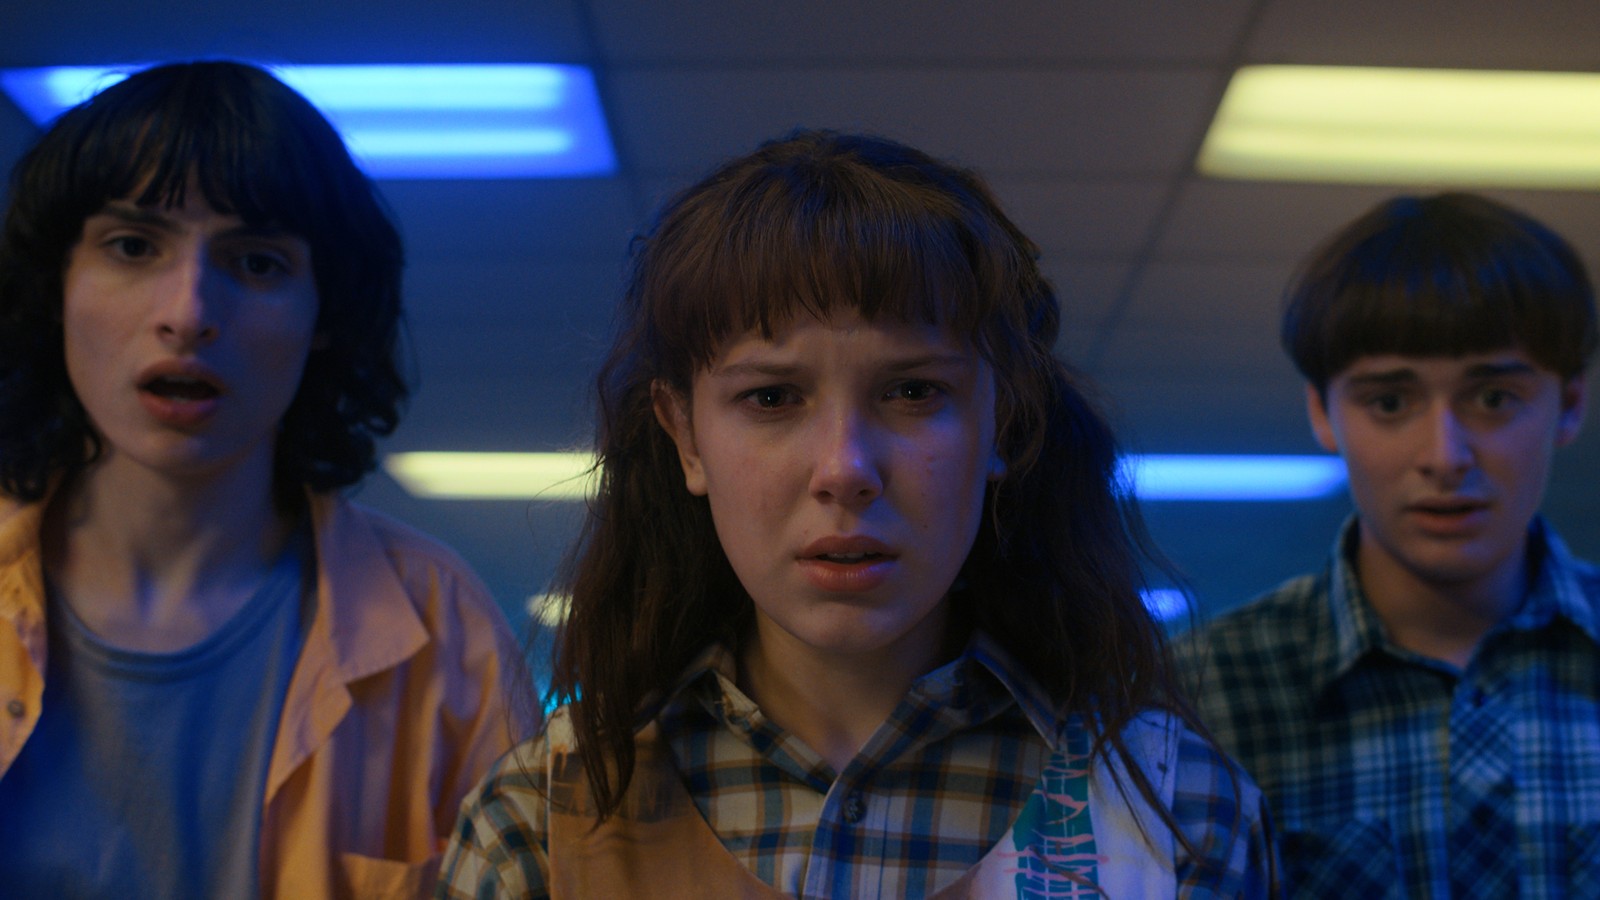 What song does Max listen to in Stranger Things 4?